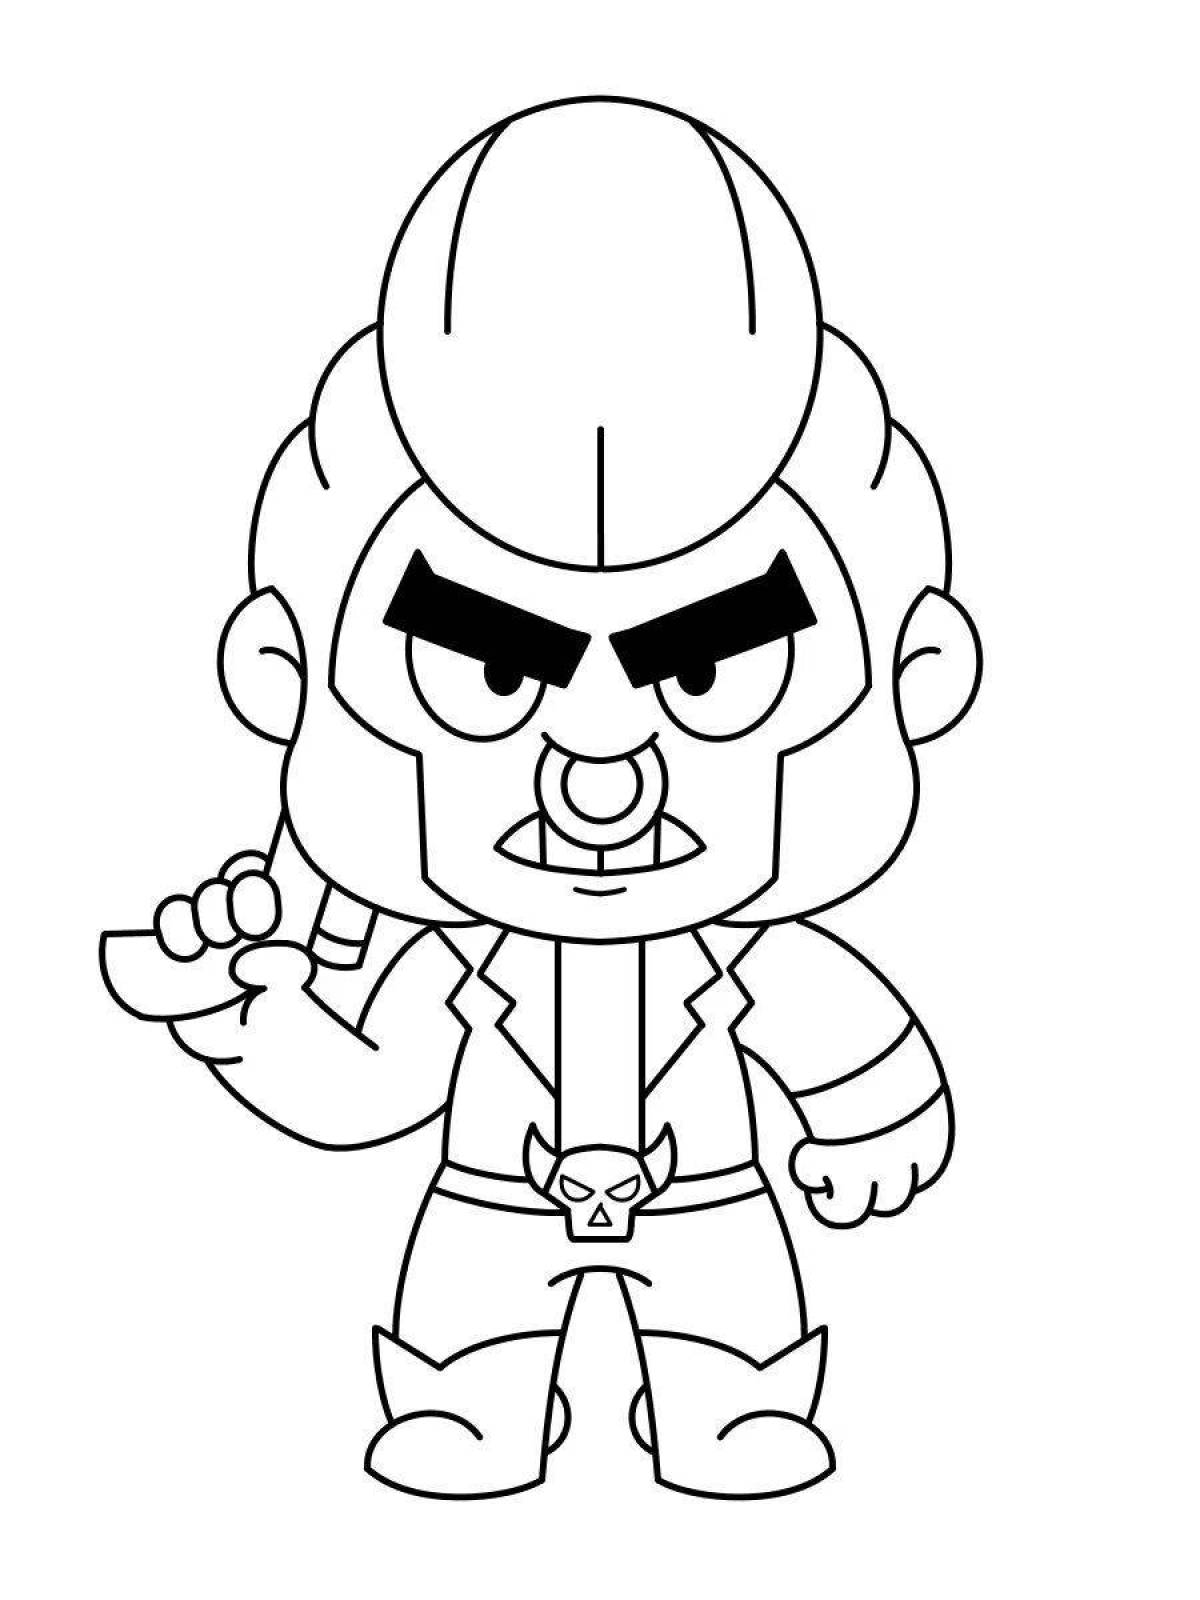 Brawler dynamic icons coloring page